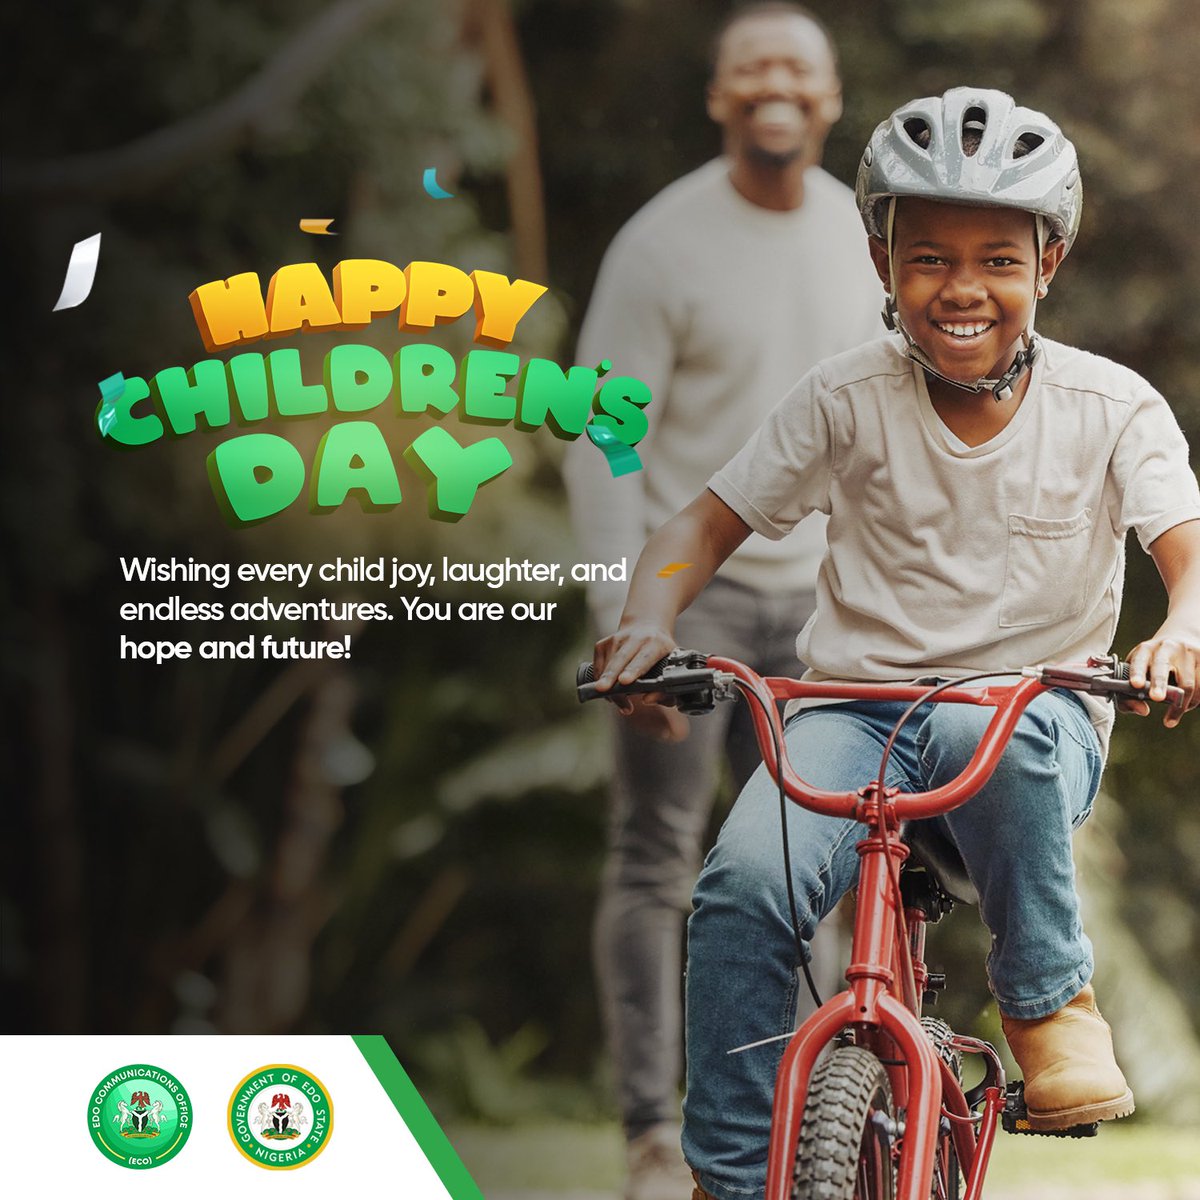 Happy Children’s Day! Wishing every child joy, laughter, and endless adventures. You are our hope and future! #HappyachildrensDay